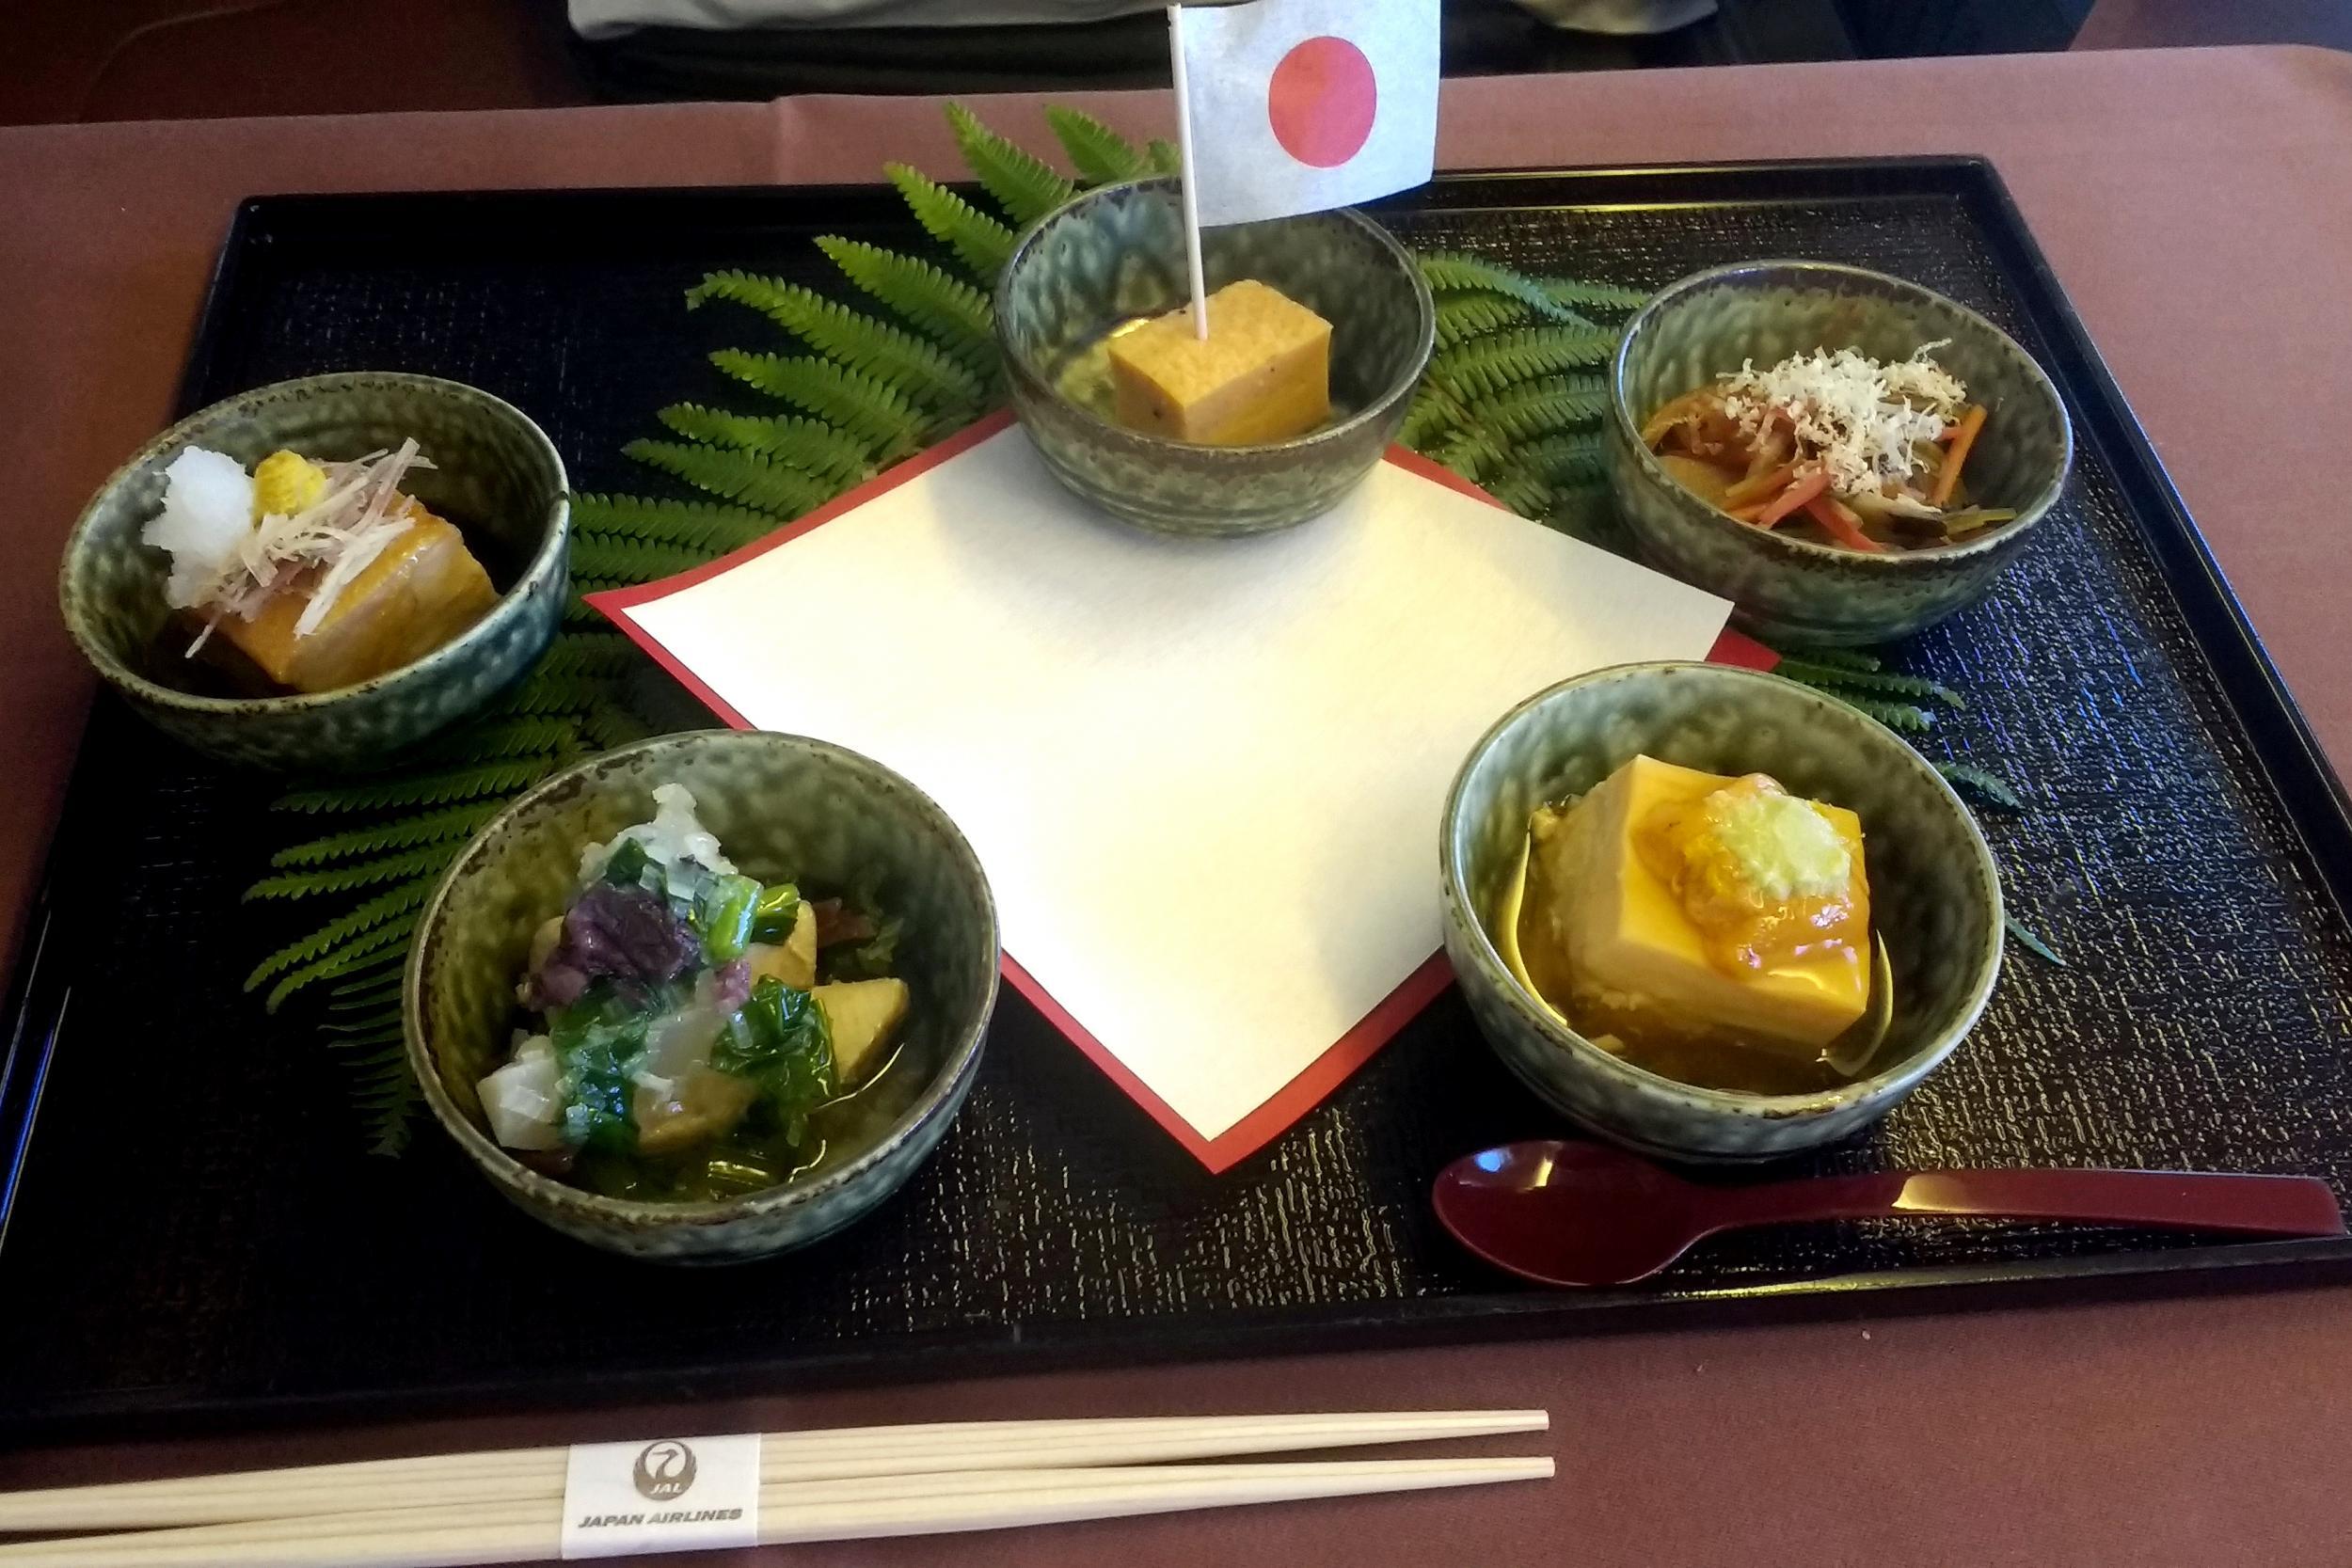 One course of Japan Airlines' kaiseki meal on its Tokyo-Jakarta route